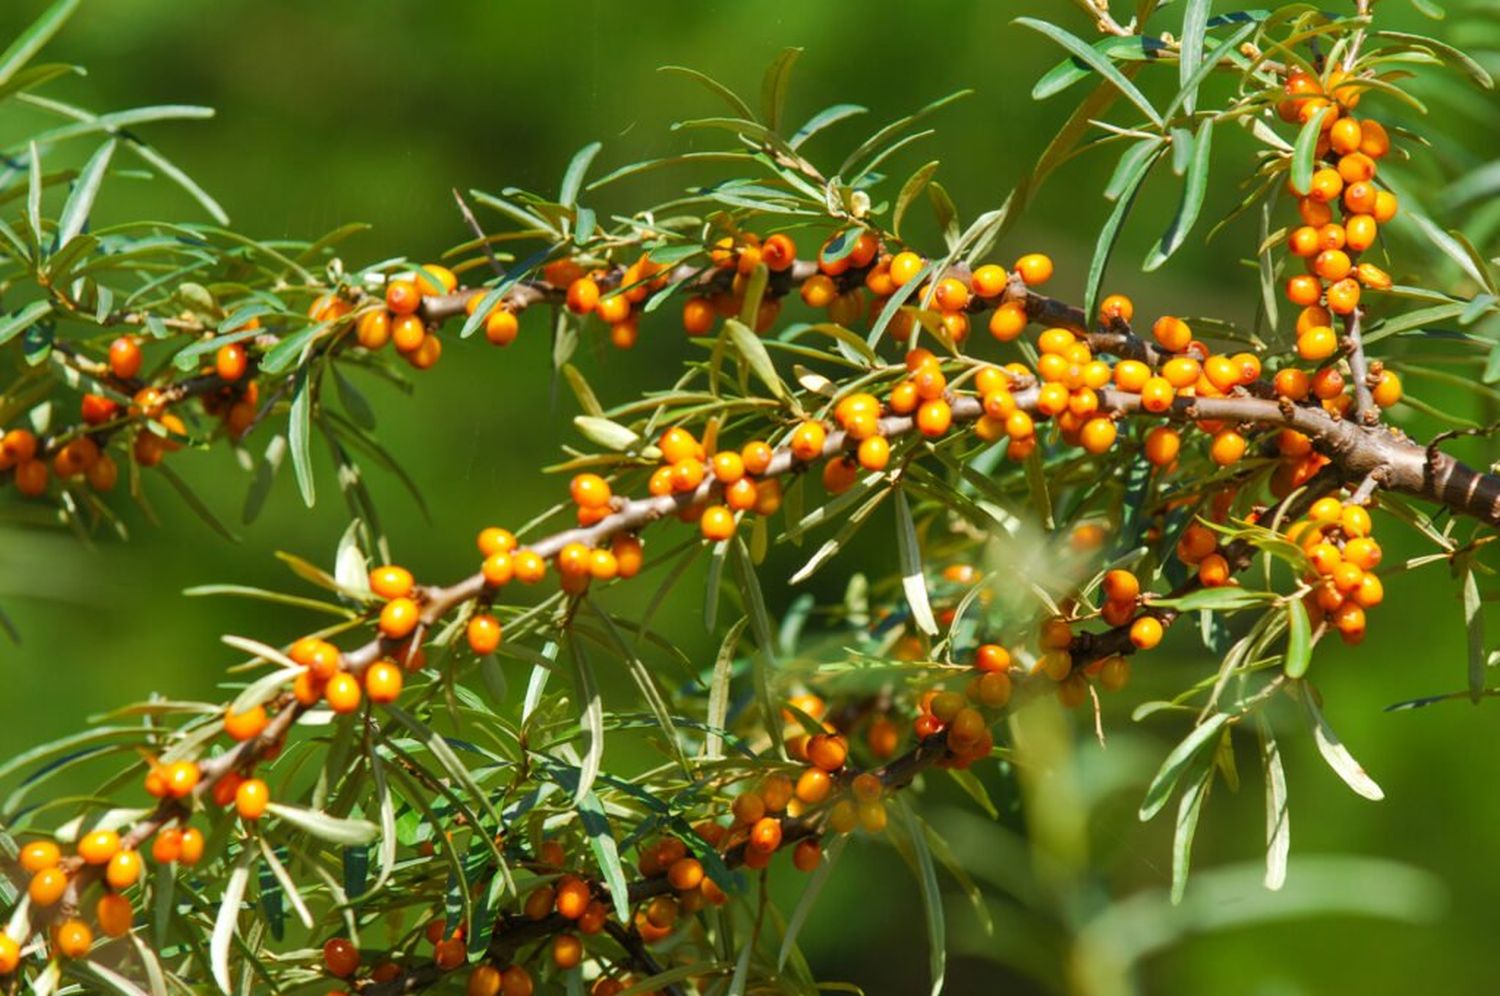 Potential of sea buckthorn oil for VAGINAL DRYNESS & membrane health